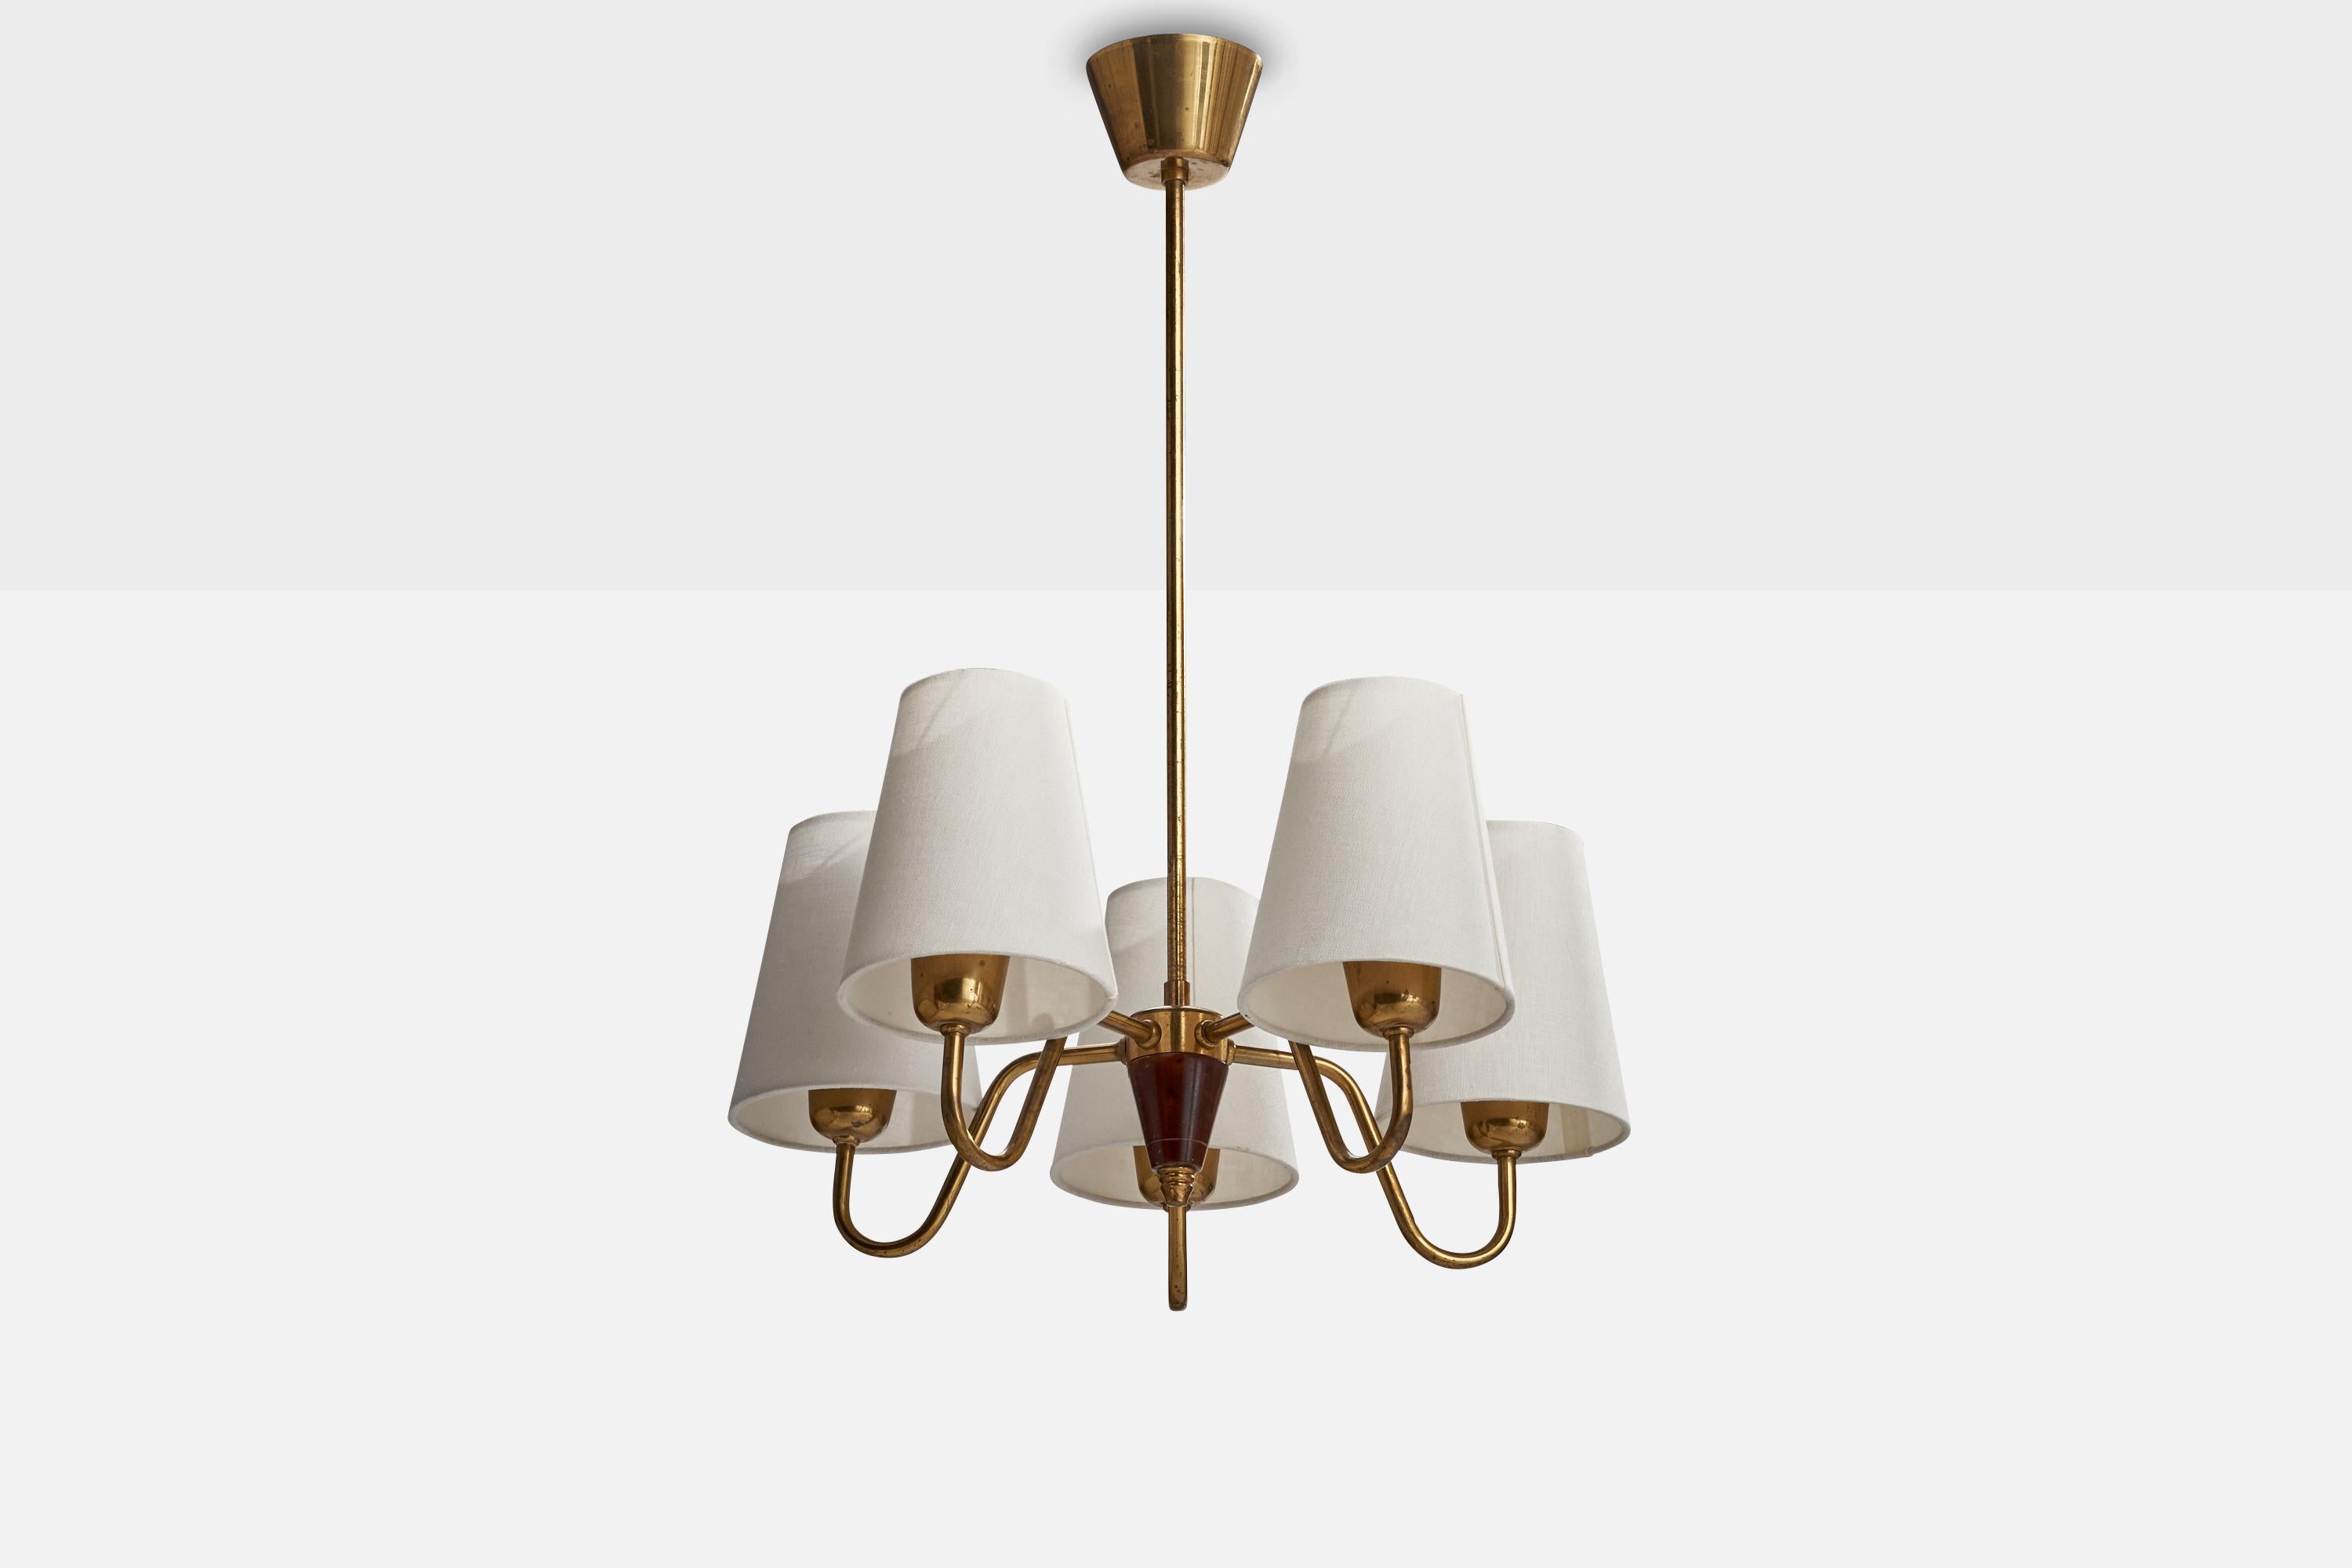 A brass, fabric and wood chandelier produced by Fog & Mørup, Denmark, 1940s.

Dimensions of canopy (inches): 3.52” H x 2.60” Diameter
Socket takes standard E-14 bulbs. 5 socket.There is no maximum wattage stated on the fixture. All lighting will be